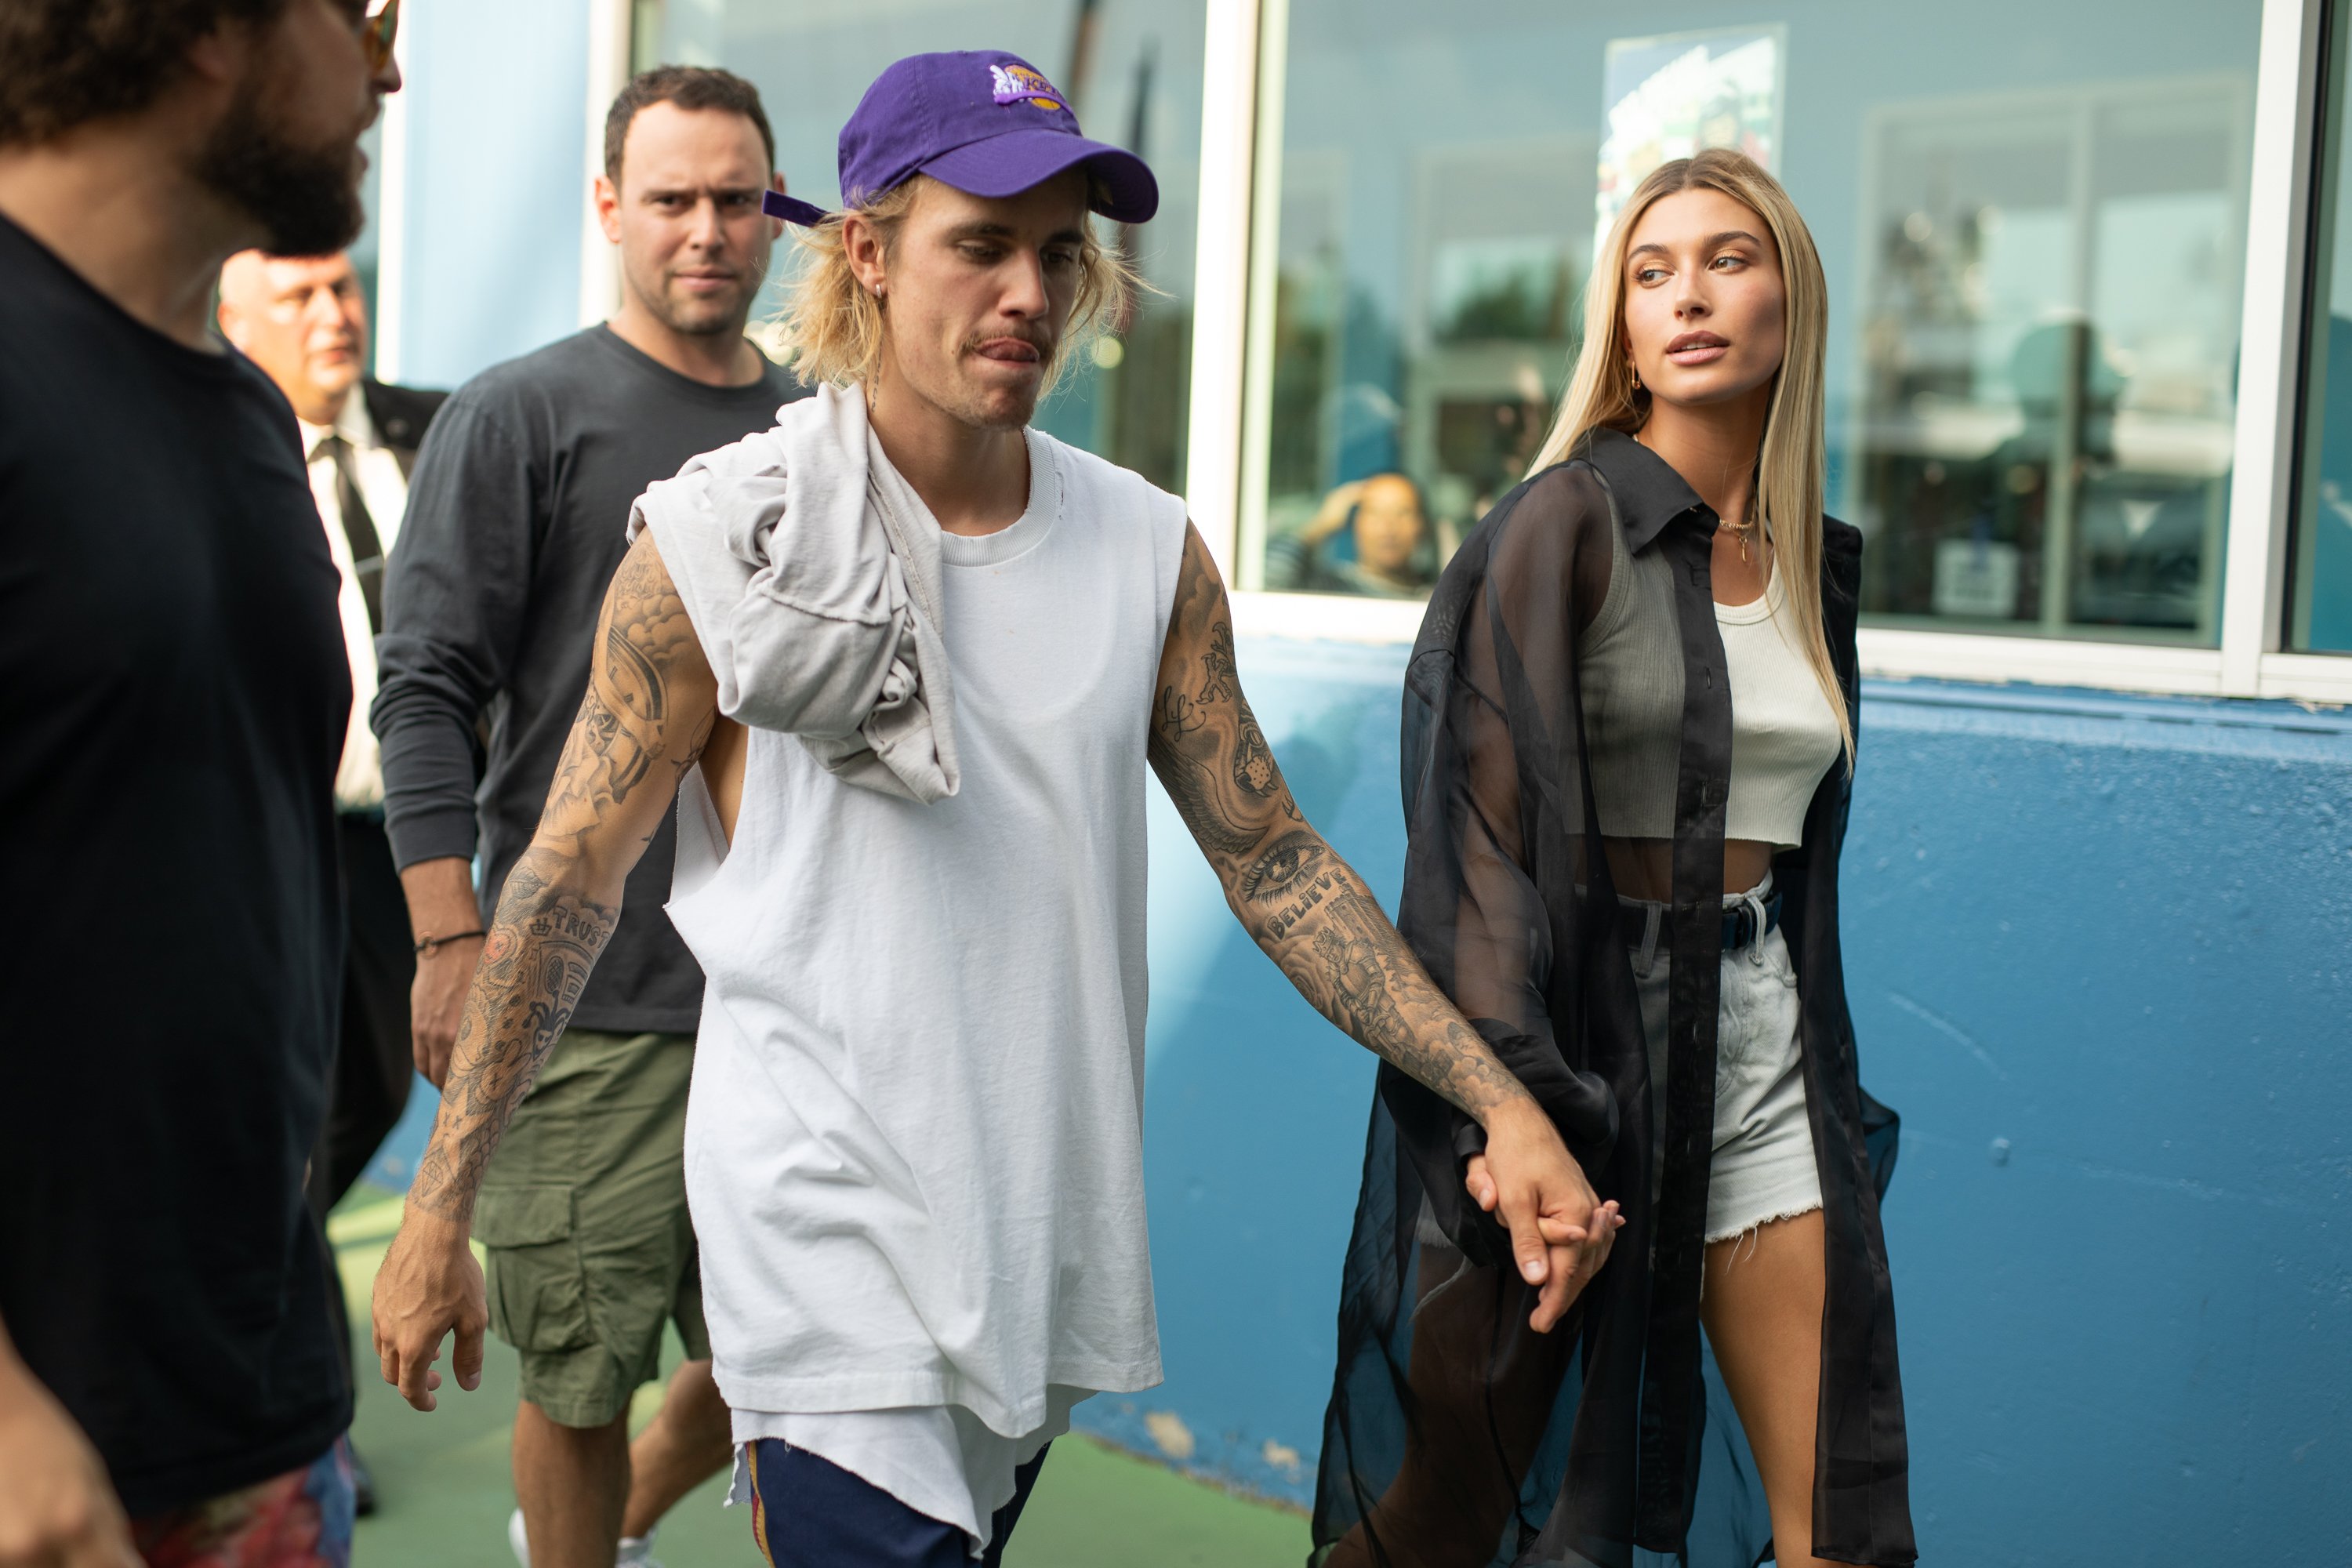 Justin Bieber and Hailey Baldwin are seen on the street attending John Elliott during New York Fashion Week on September 6, 2018. | Photo: Getty Images.